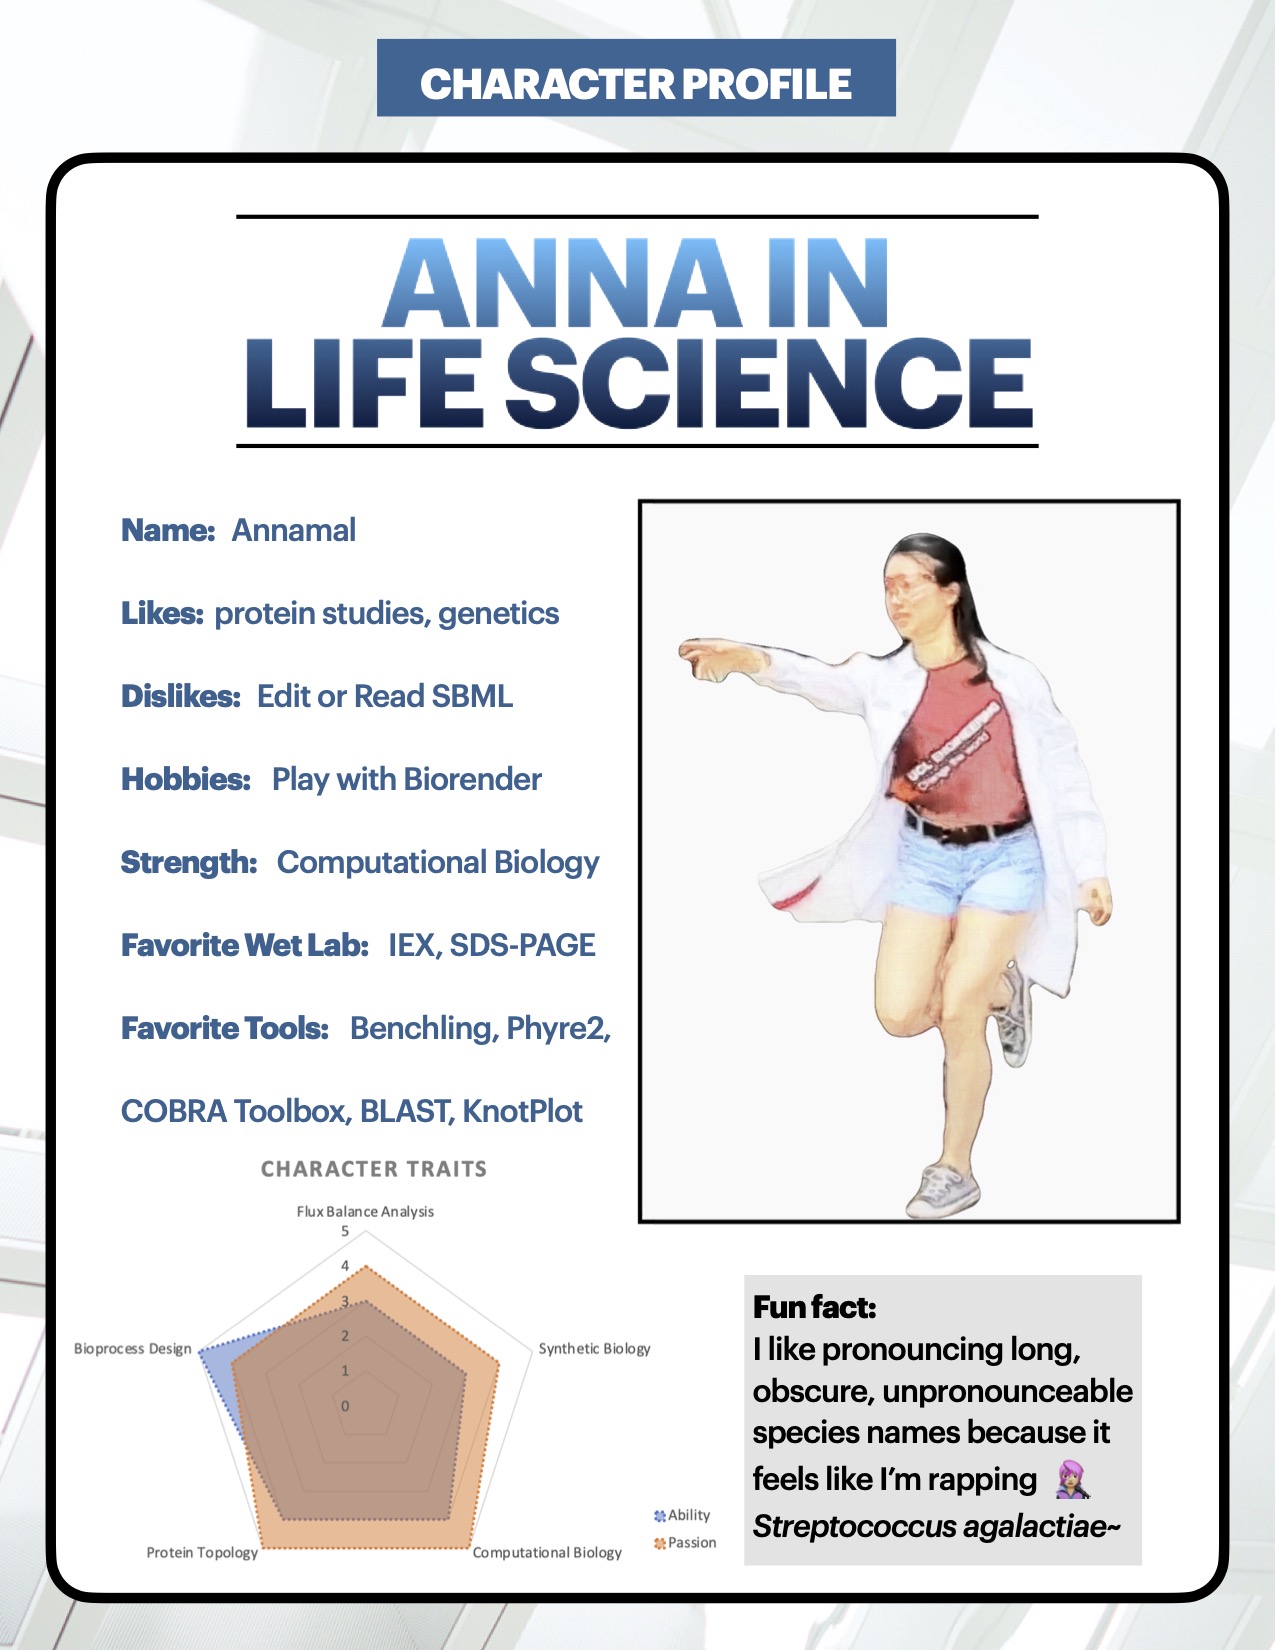 Anna in life science - anime character profile